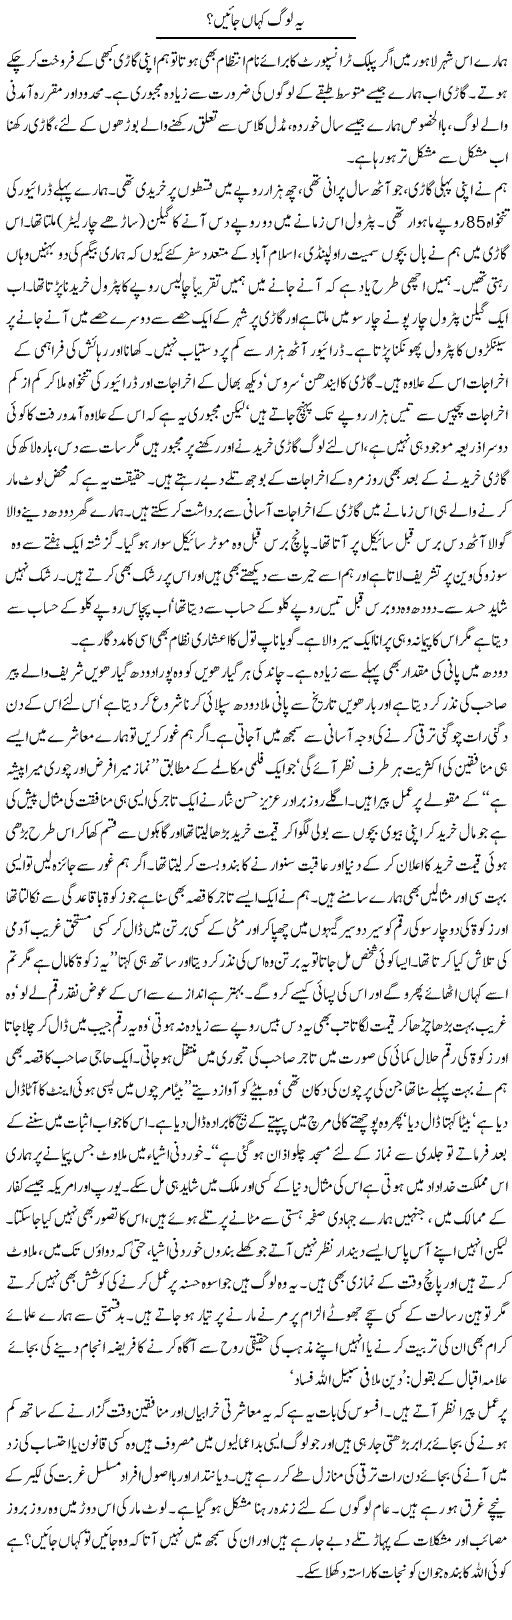 These People Express Column Hameed Akhtar 26 November 2010